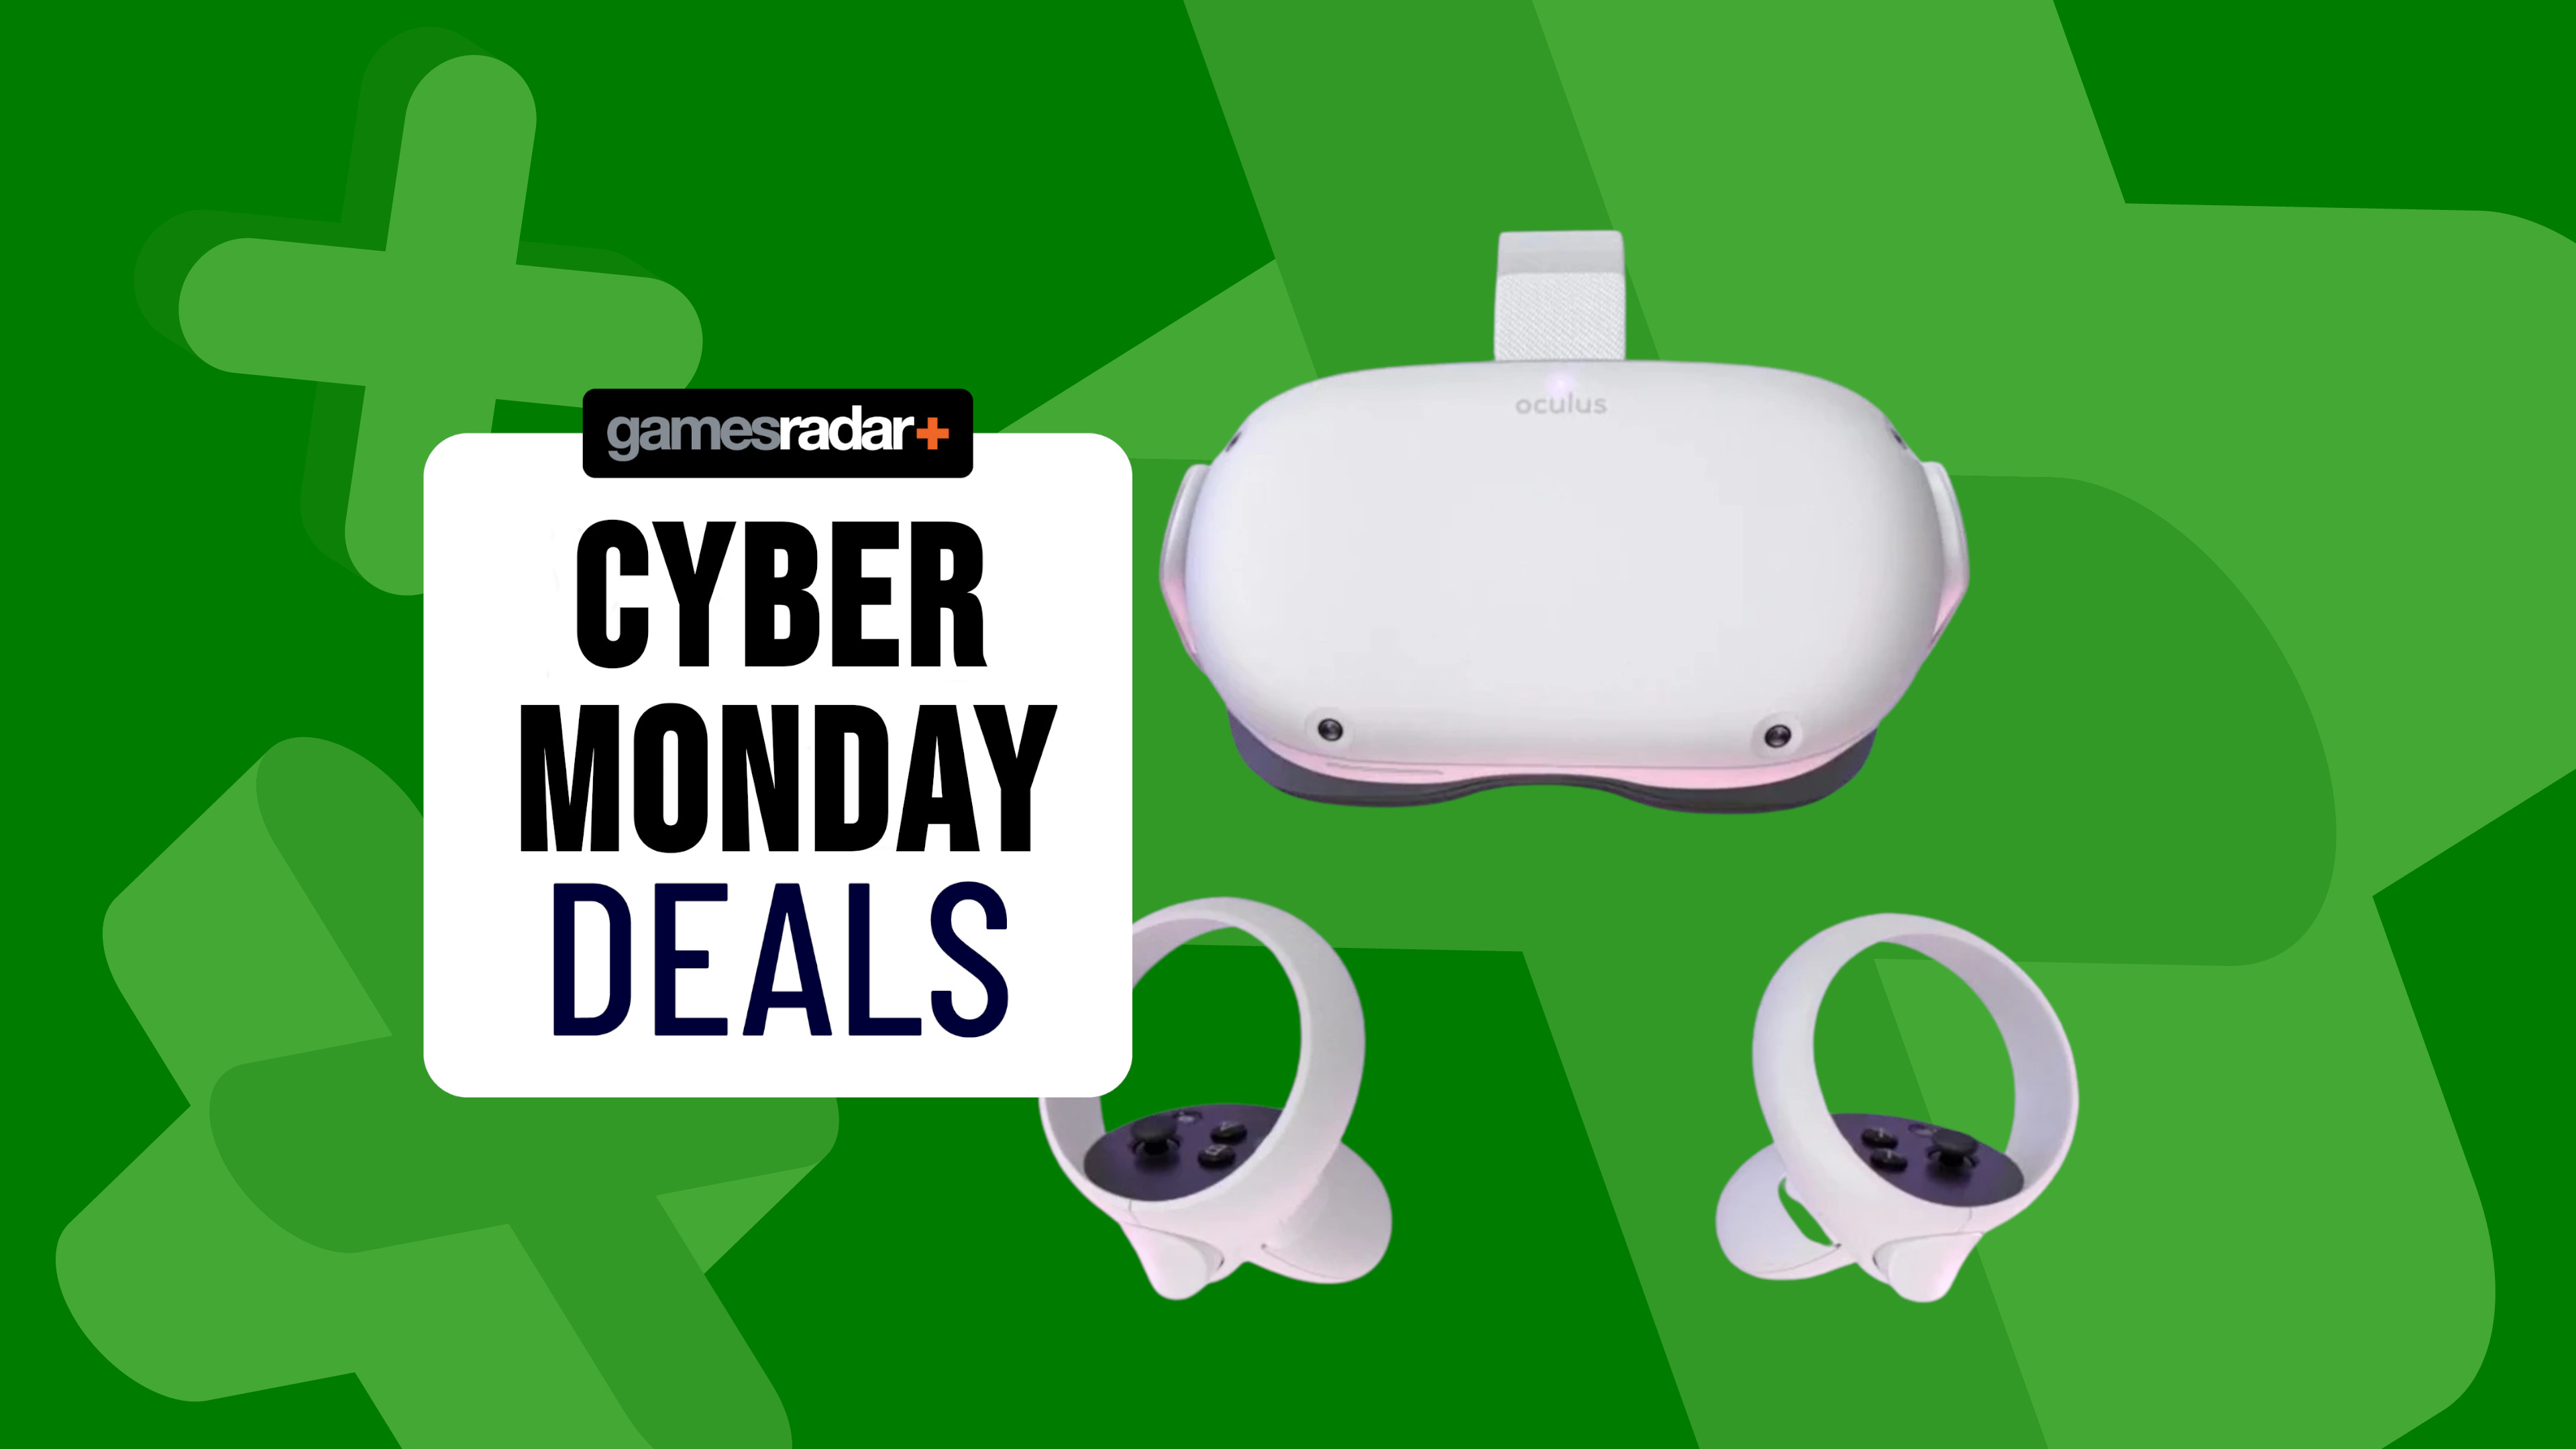 Cyber Monday Oculus Quest 2 deals live: all the latest savings on the Meta headset